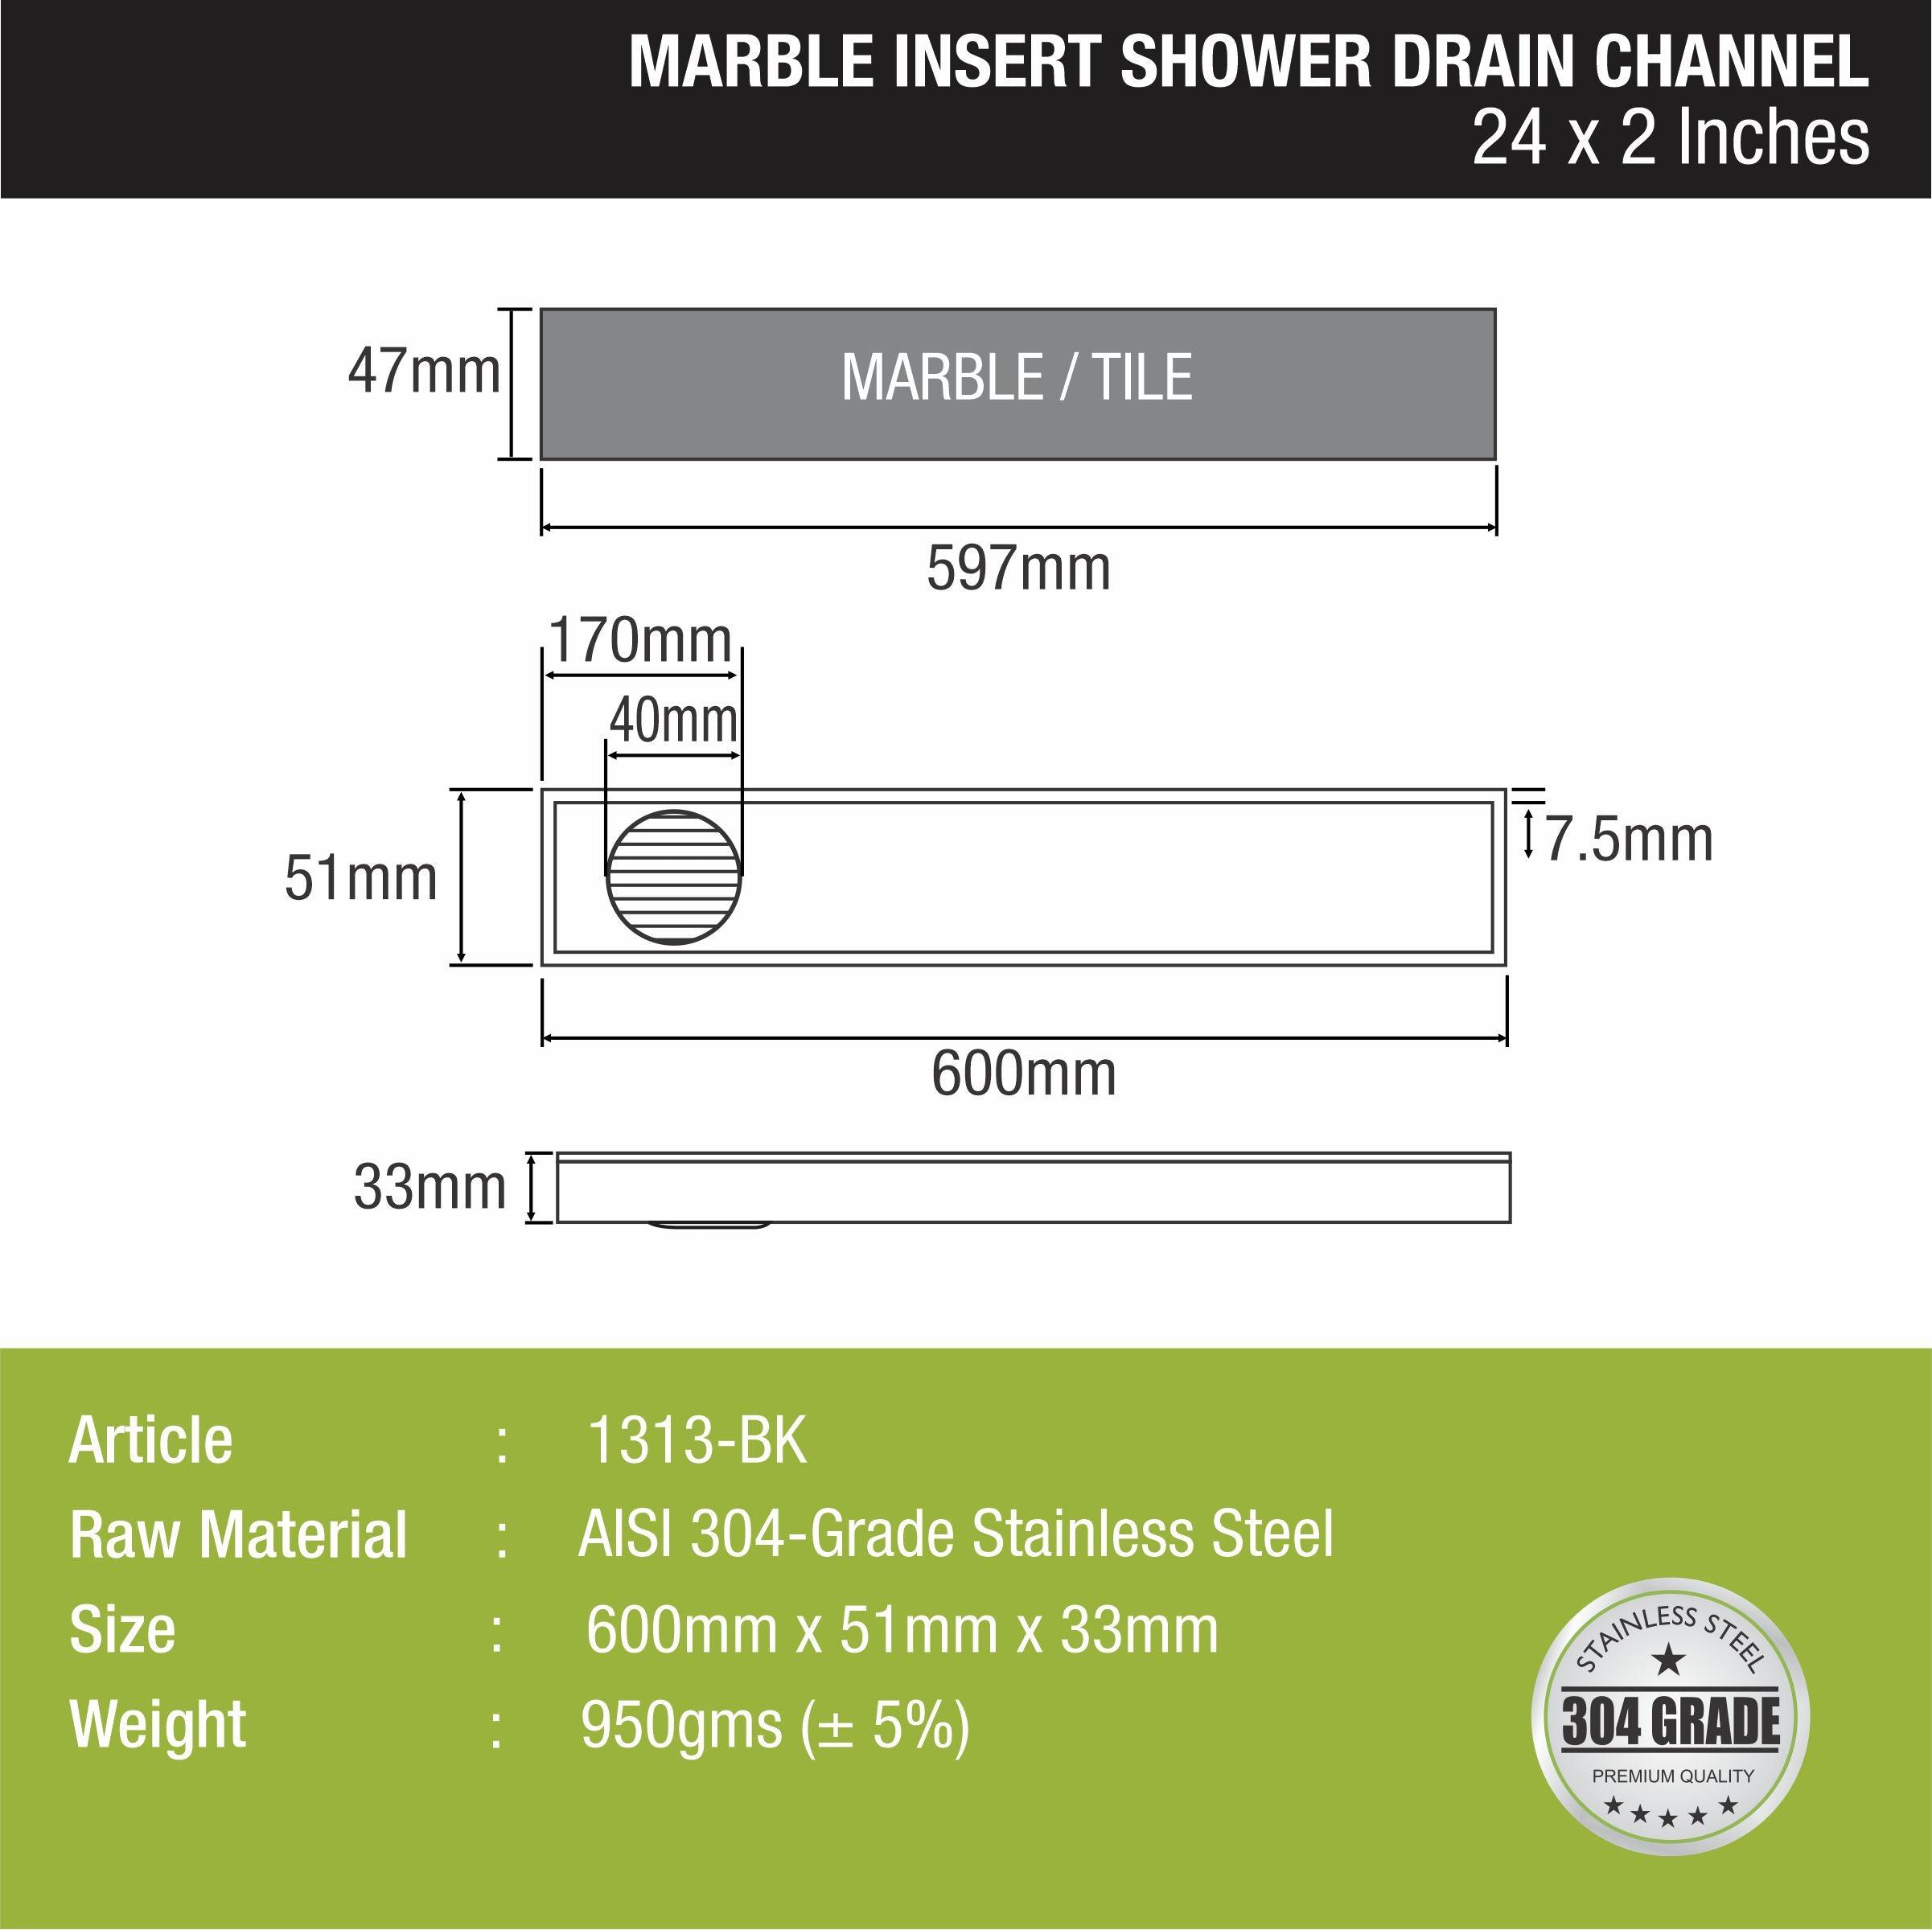 Marble Insert Shower Drain Channel - Black (24 x 2 Inches) size and measurement